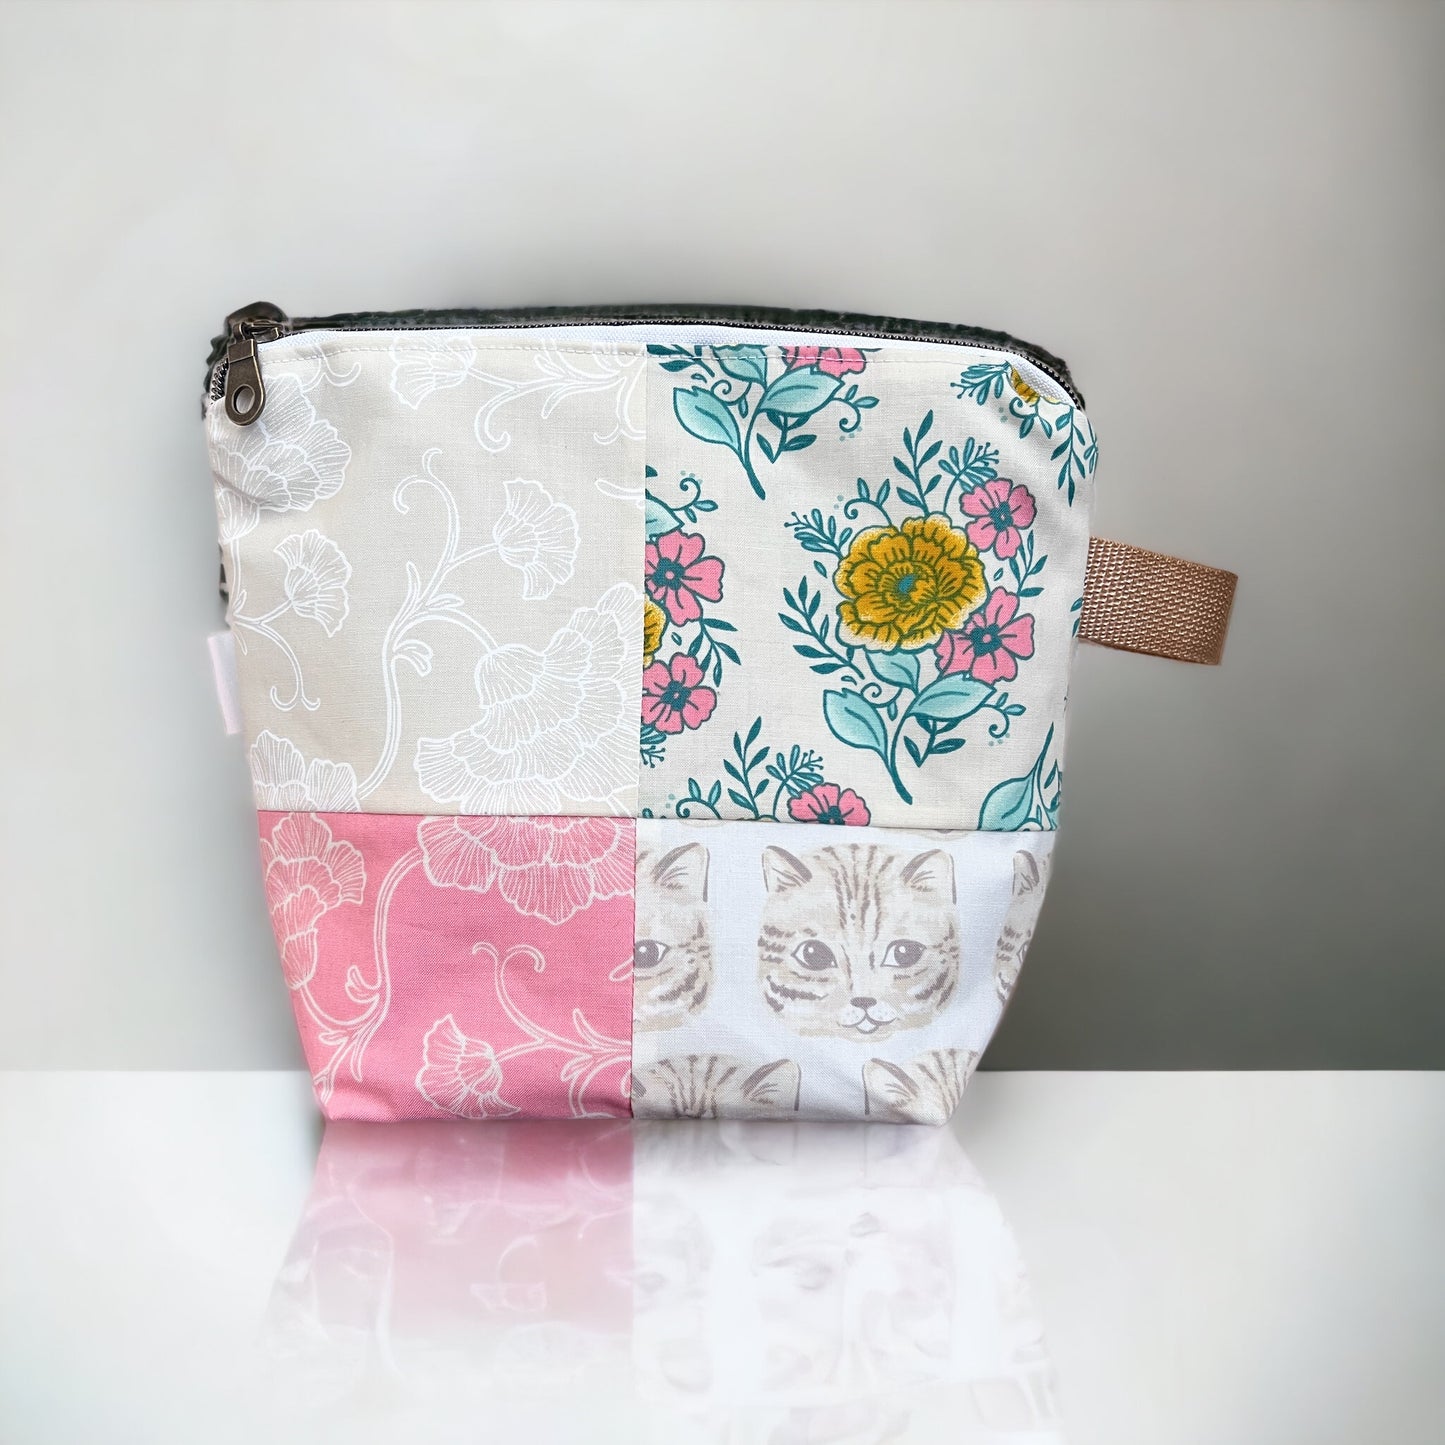 Sock Sized Project bag- Patchwork with cats and florals